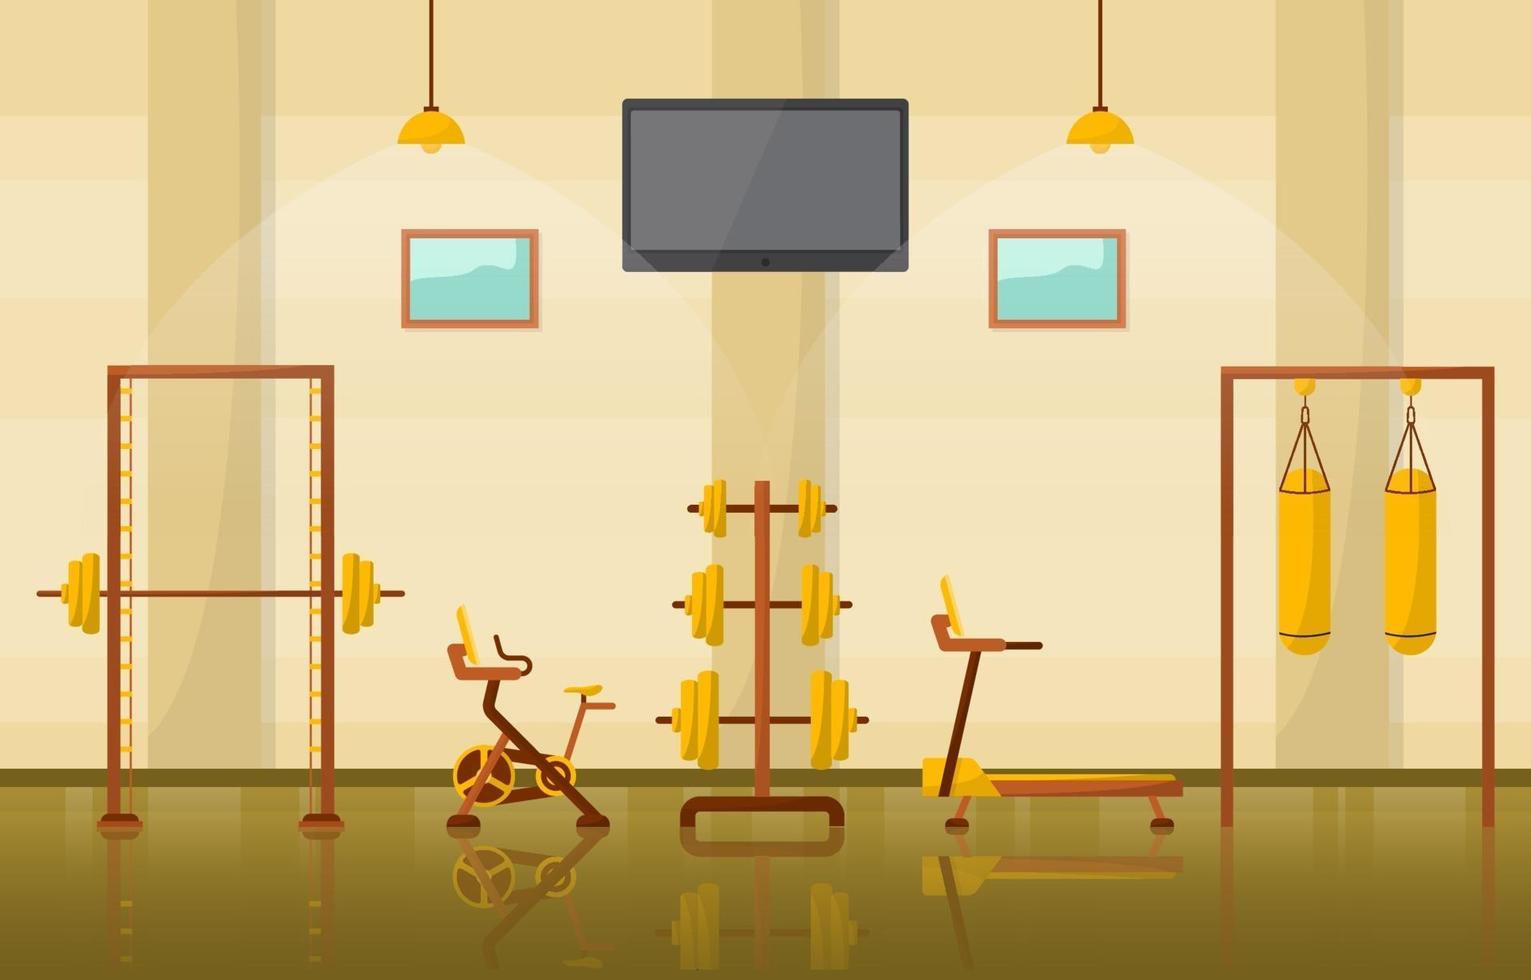 Fitness Gym Interior with Bodybuilding Equipment Vector Illustration